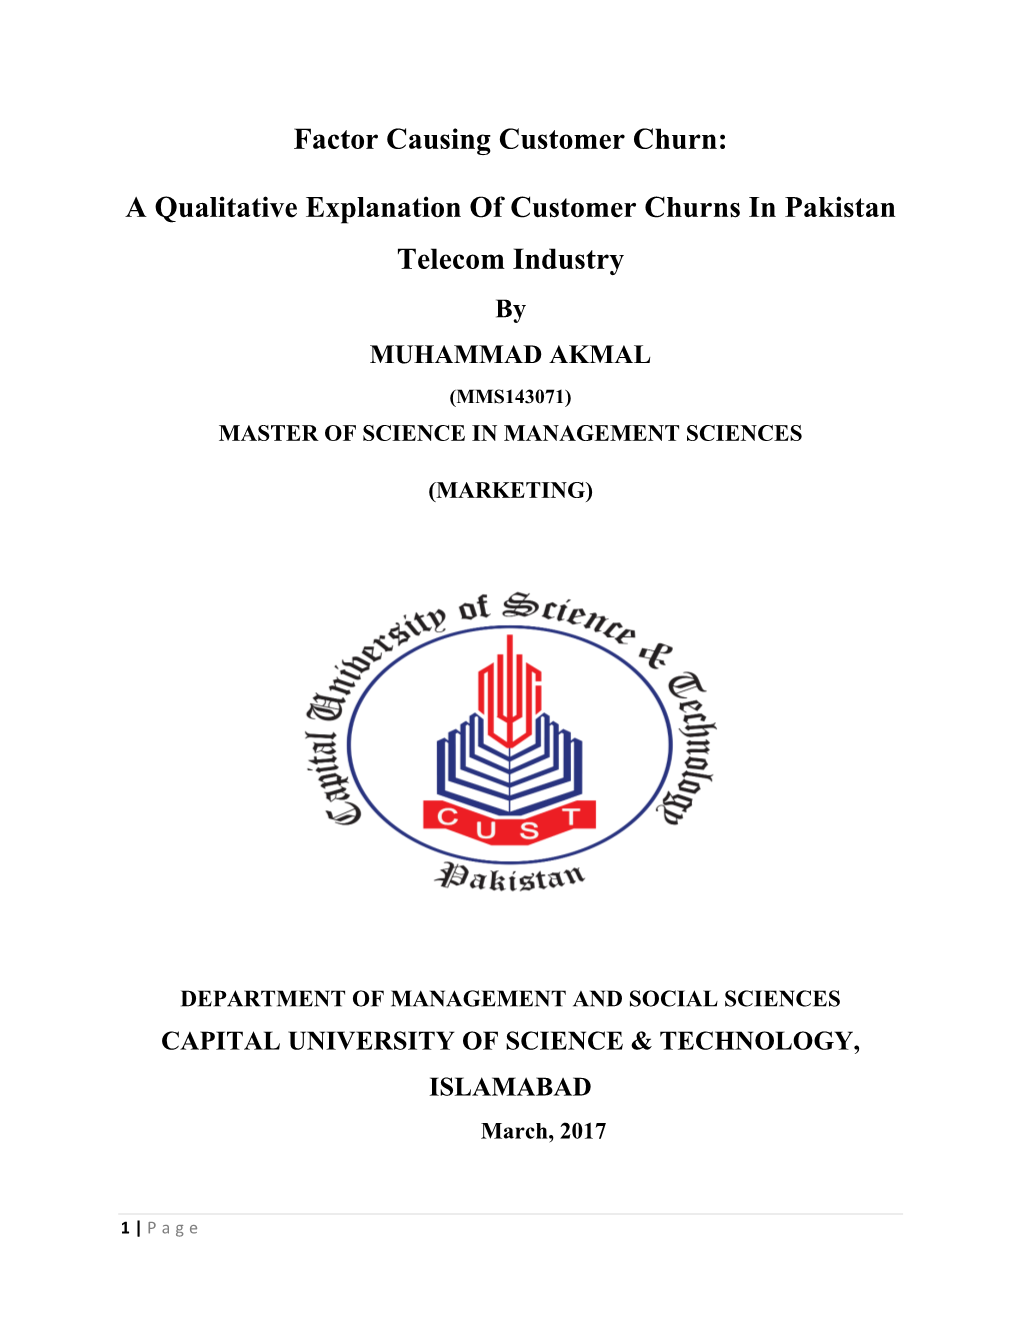 A Qualitative Explanation of Customer Churns in Pakistan Telecom Industry by MUHAMMAD AKMAL (MMS143071) MASTER of SCIENCE in MANAGEMENT SCIENCES